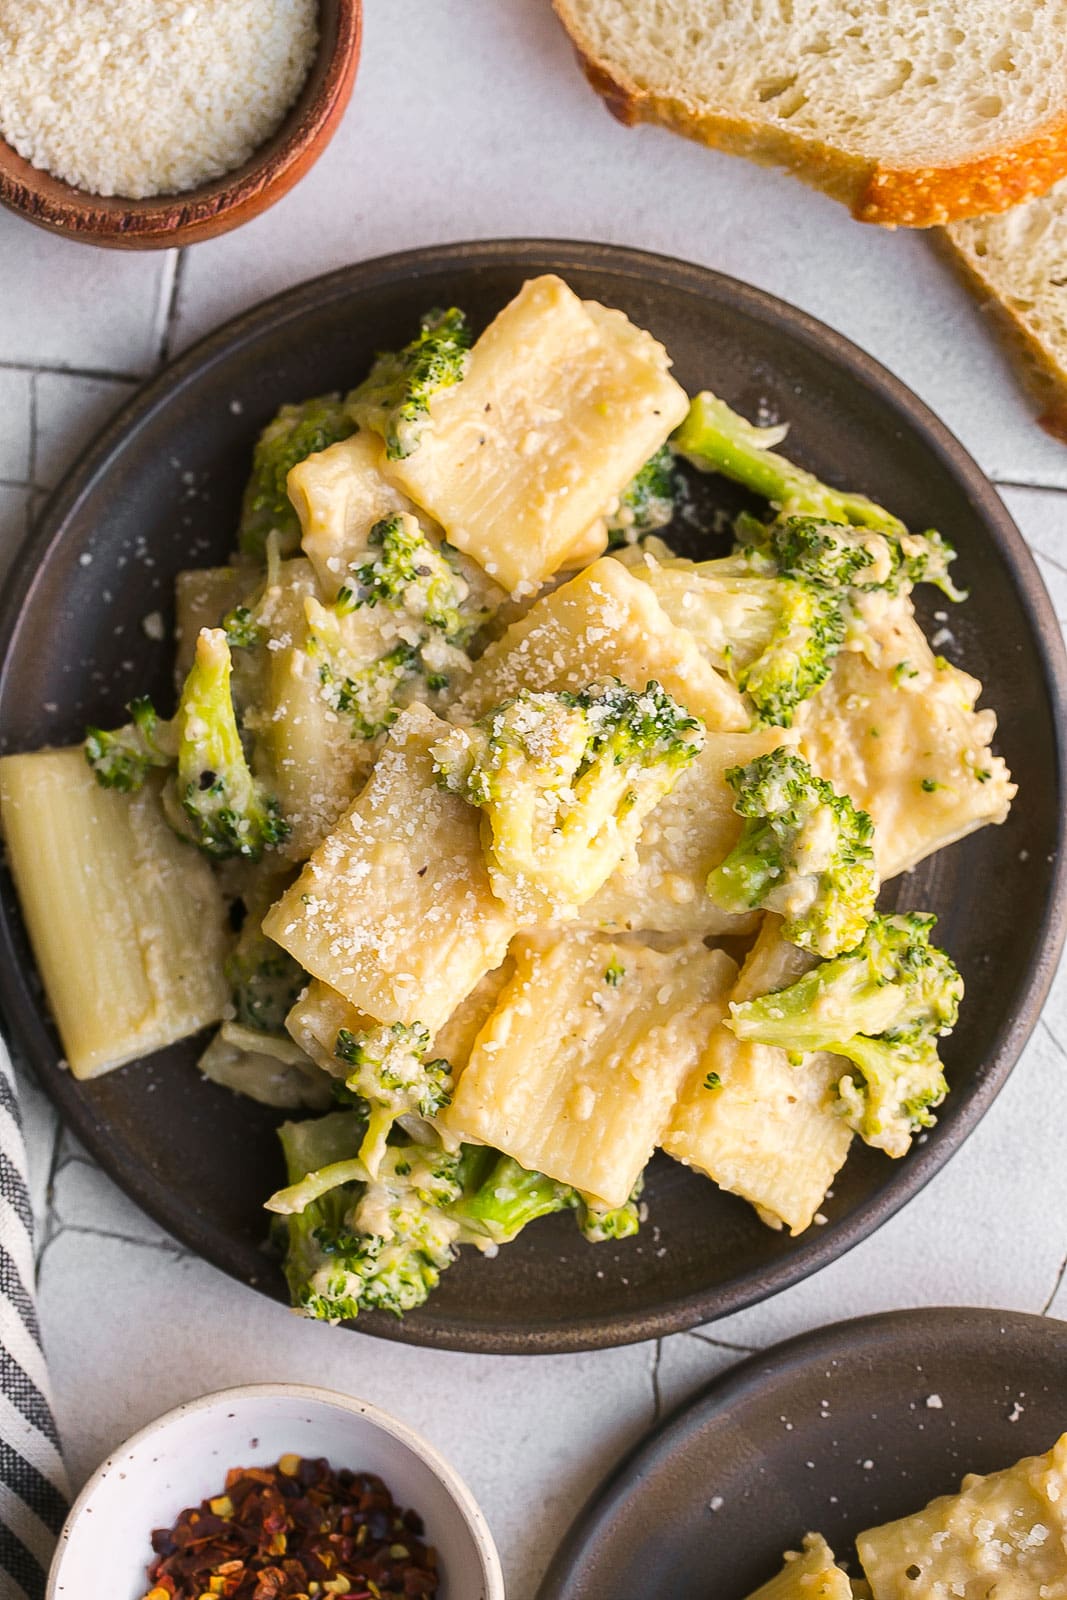 Broccoli and pasta in a cheese sauce.